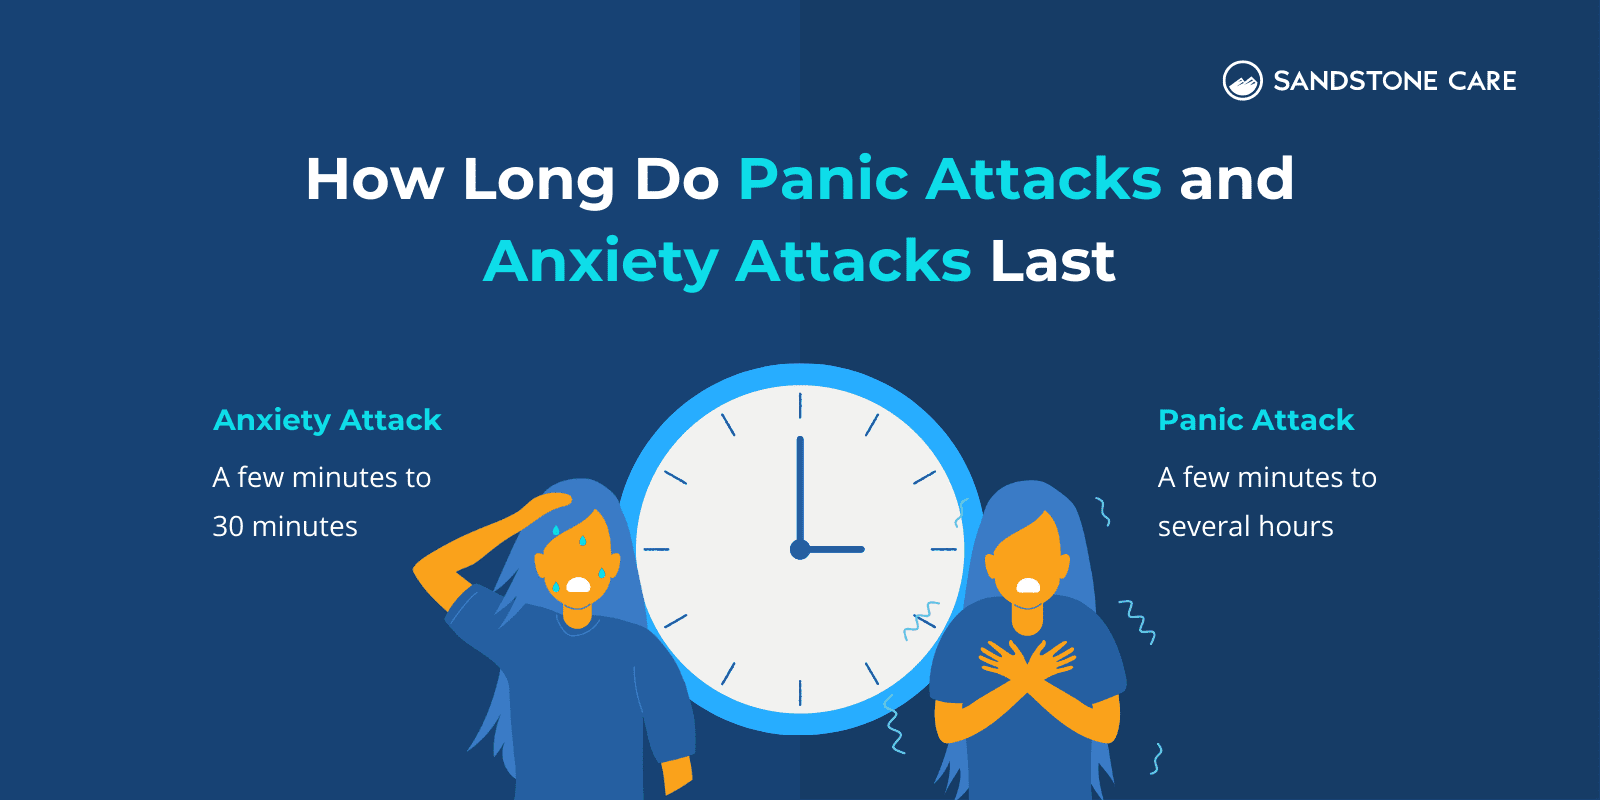 "How Long Does Panic Attack And Anxiety Attack Last" represented with relevant graphics